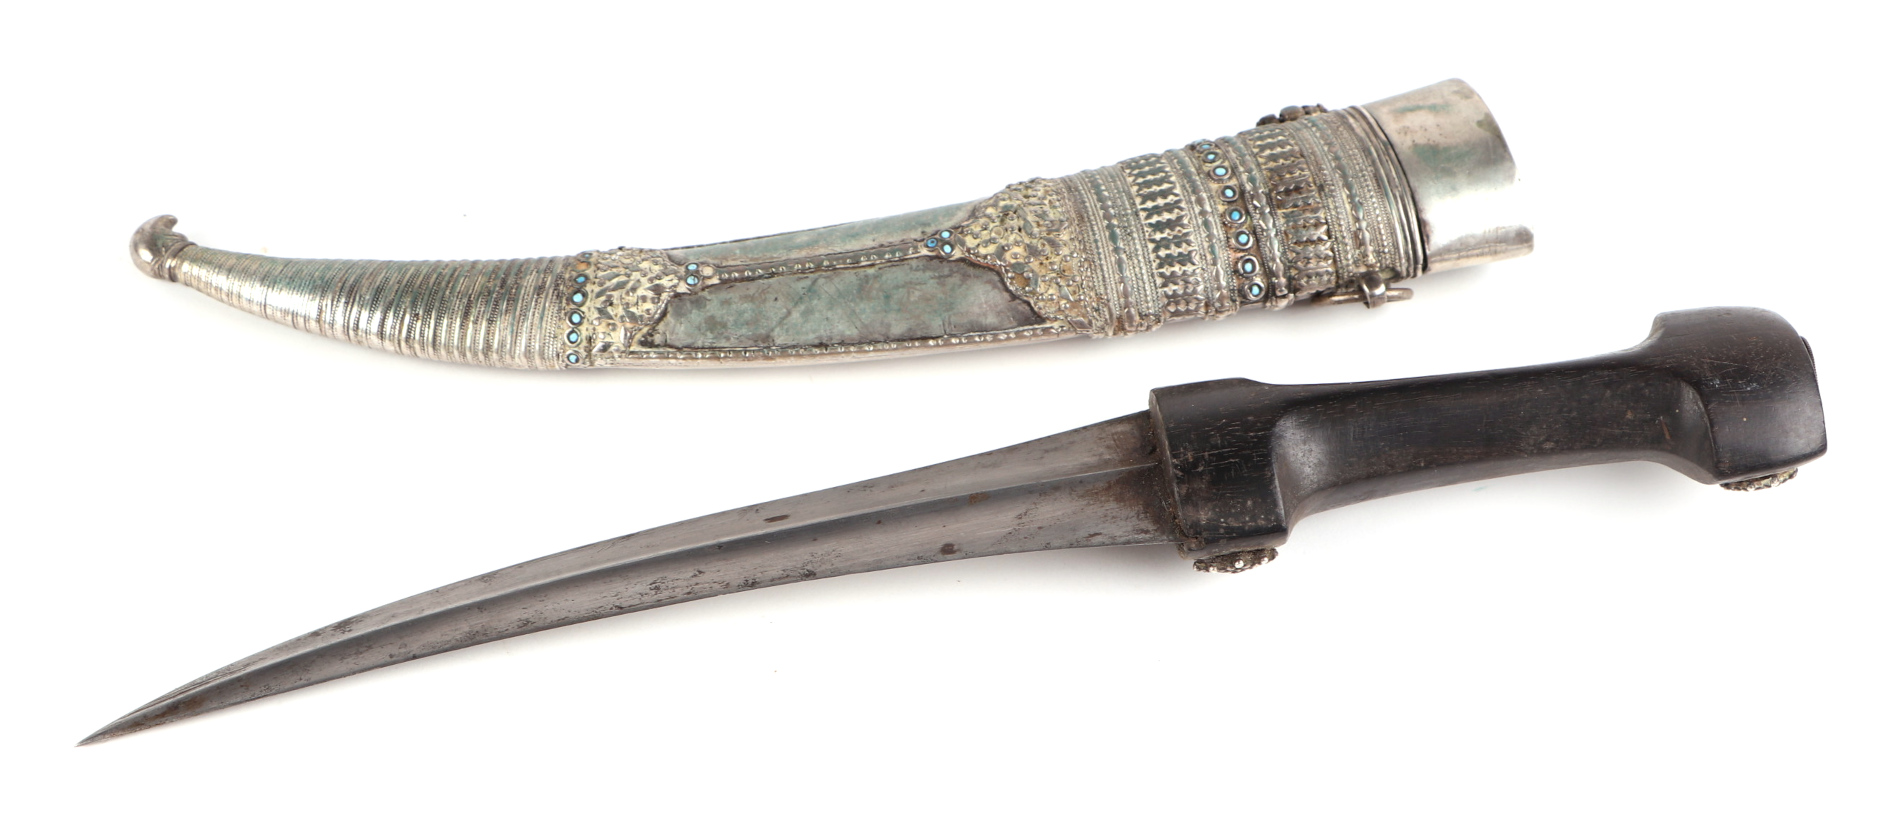 A Persian Khanjar dagger with steel double fuller curved blade, jewelled with metal scabbard and - Image 3 of 5